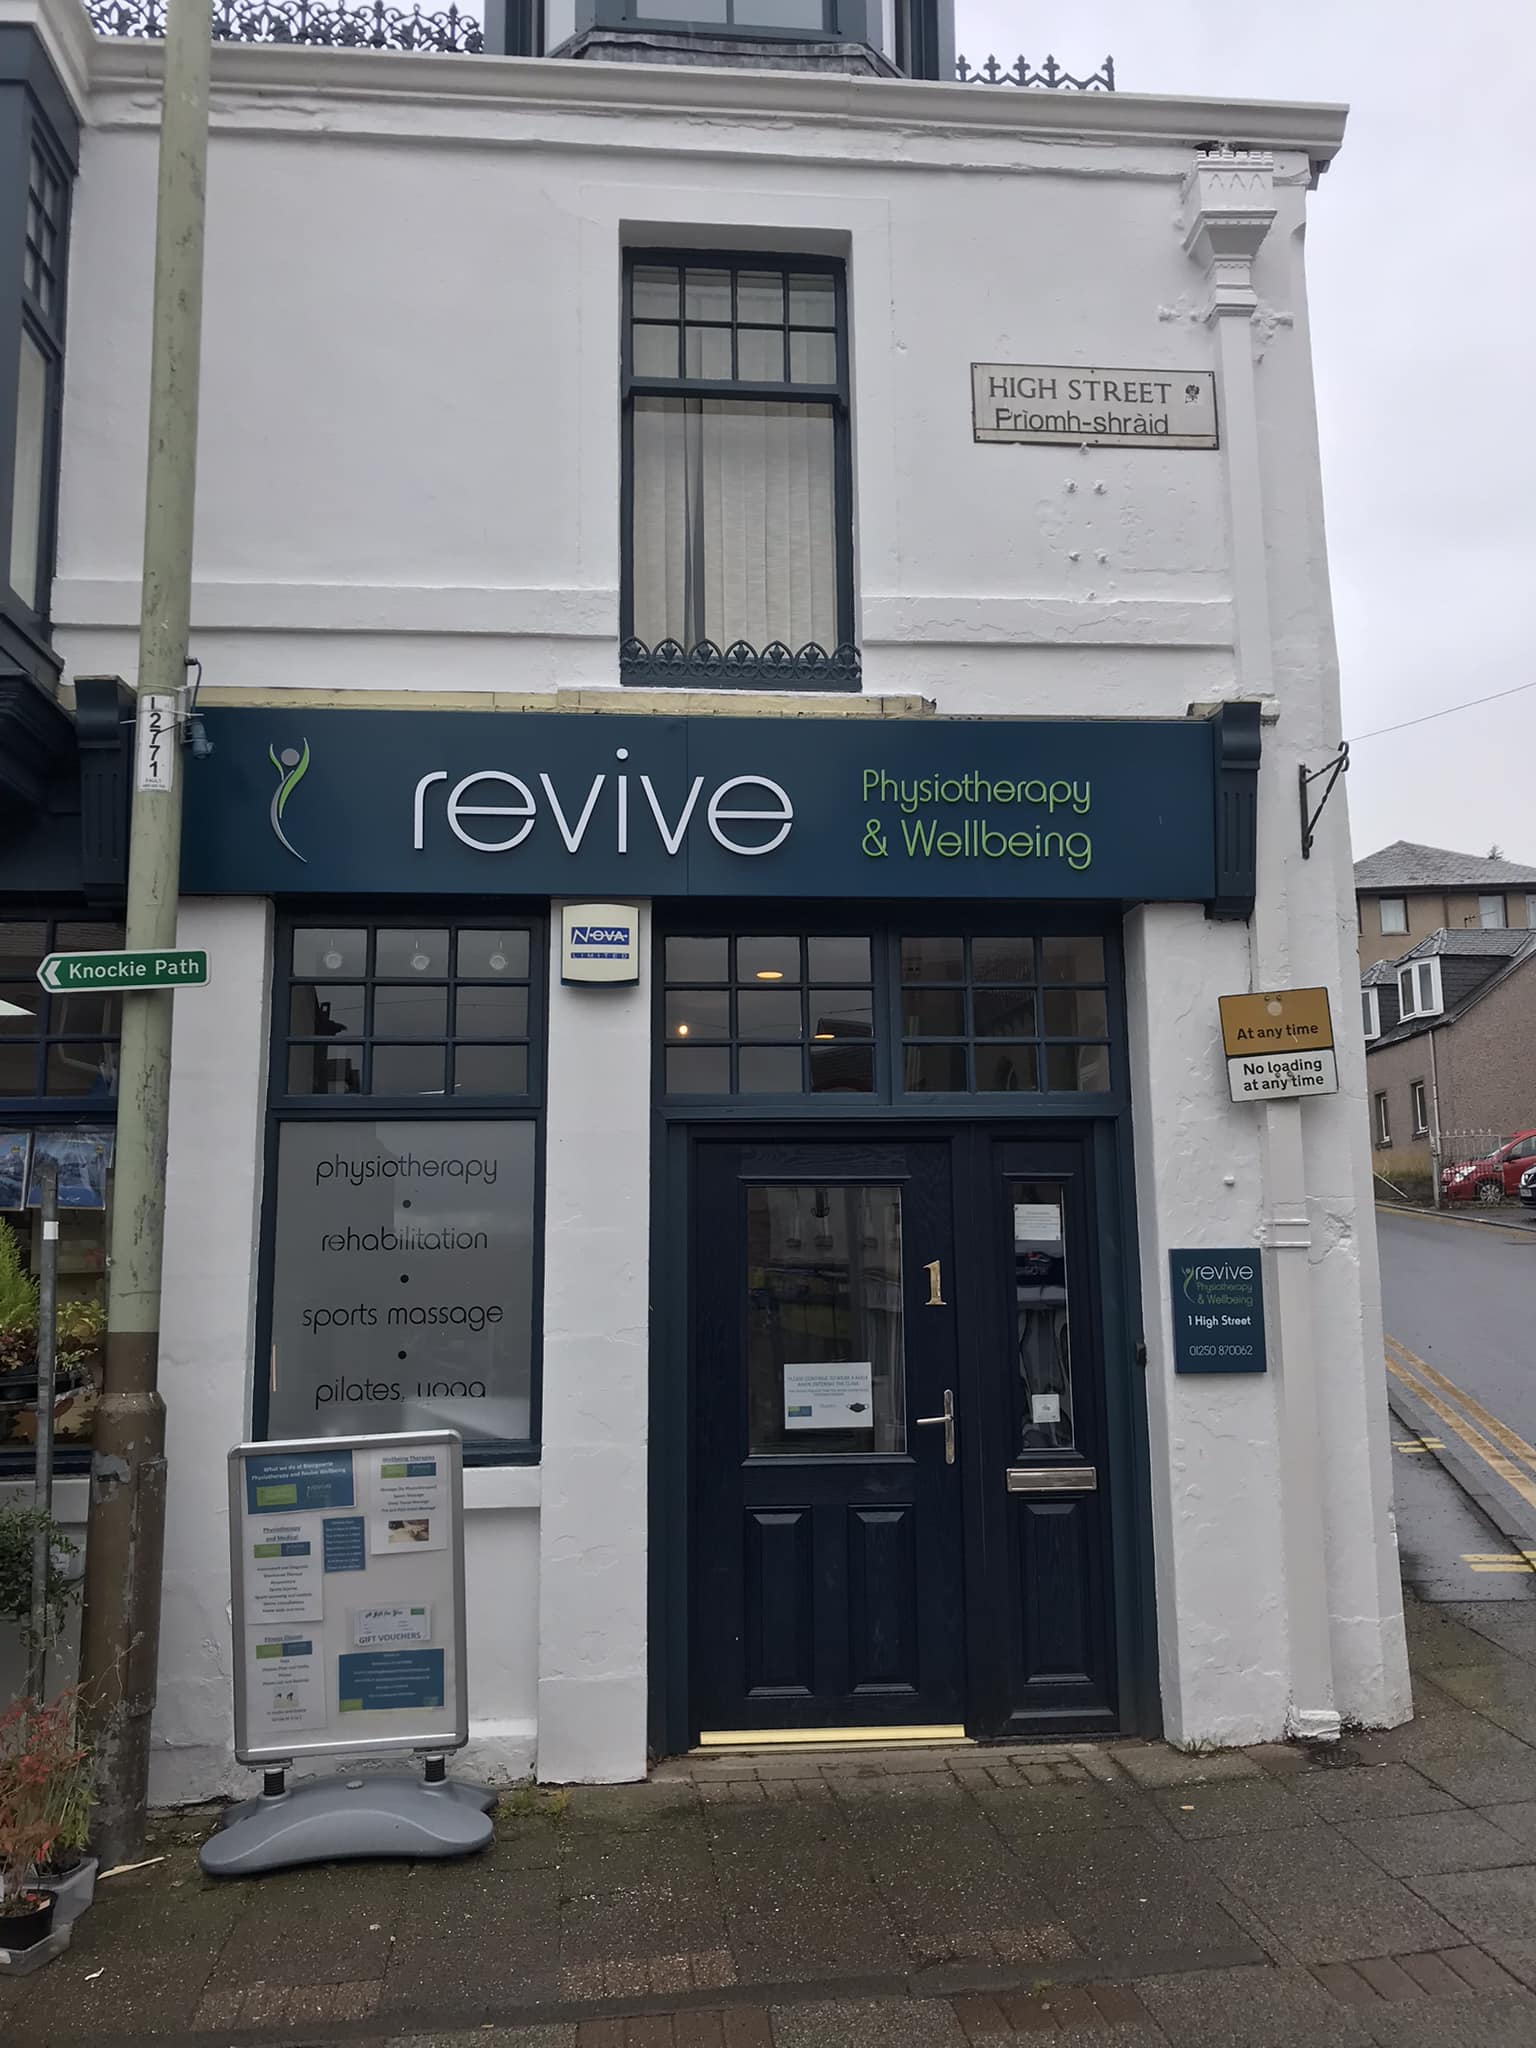 Revive Physiotherapy and Wellbeing